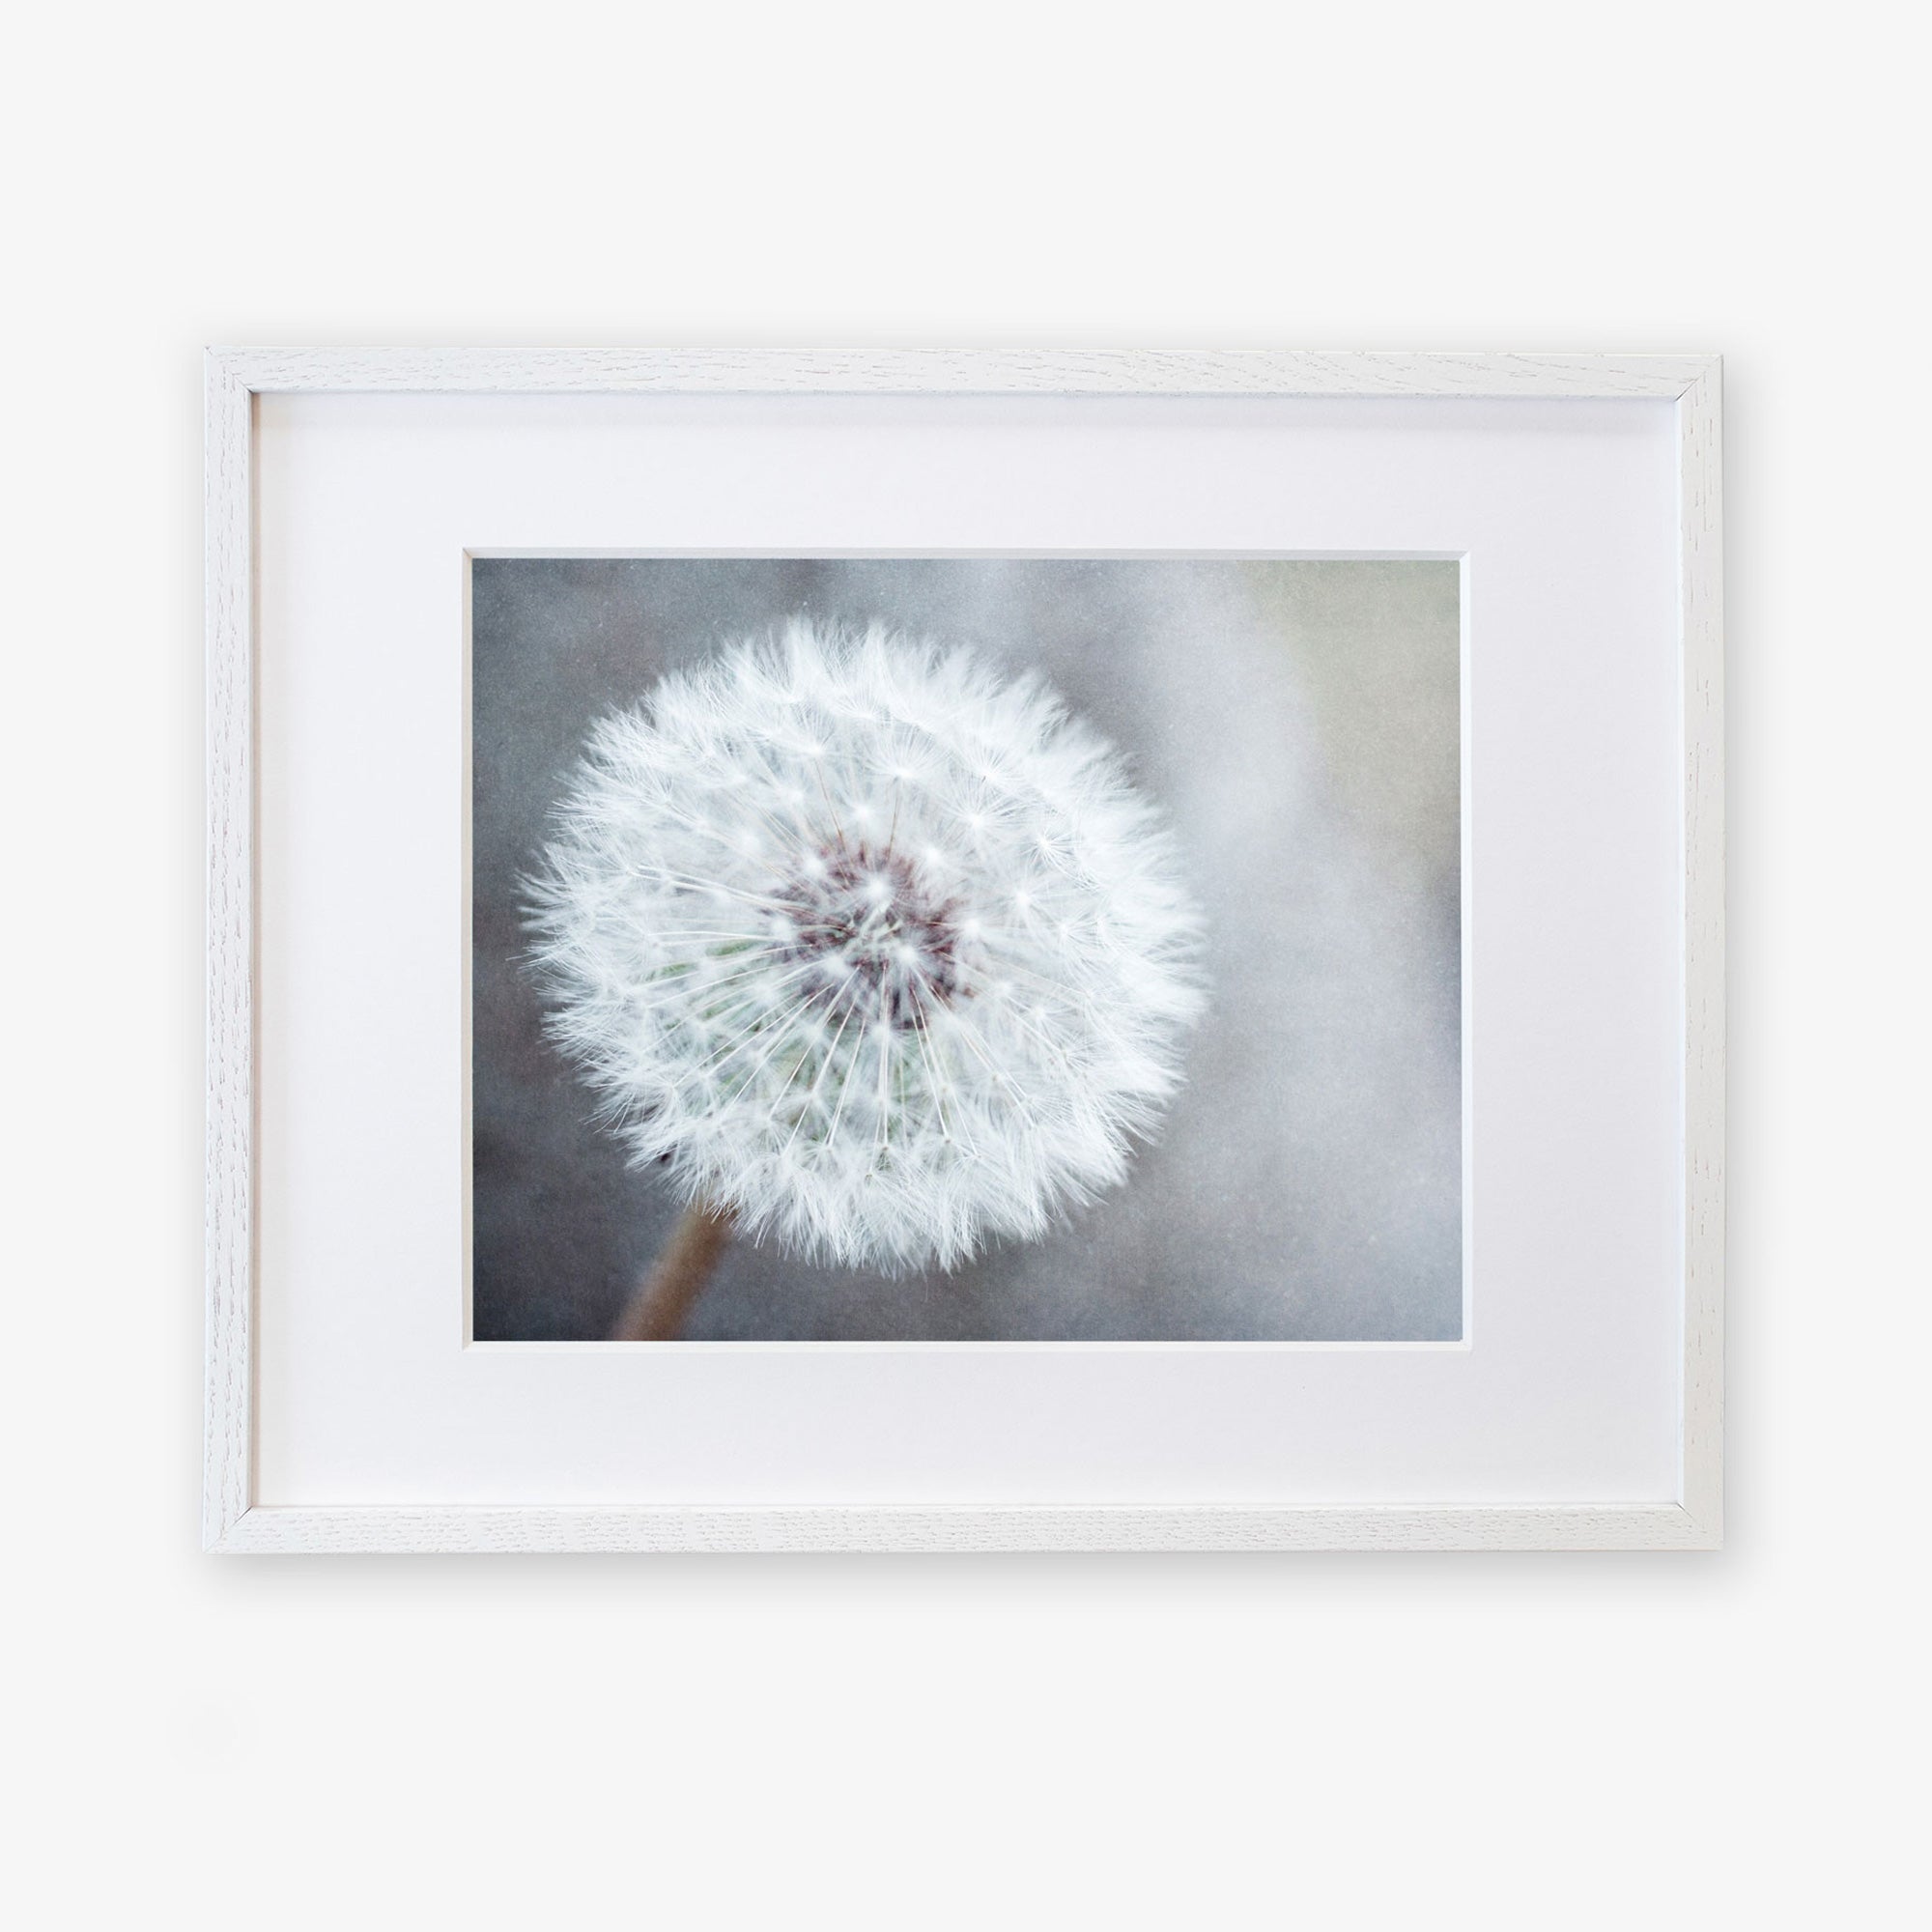 A framed photograph of a Neutral Grey Floral Print, &#39;Dandelion King&#39;, printed on archival photographic paper, showing detailed white fluffy seeds against a soft gray background, displayed in a white frame from Offley Green.